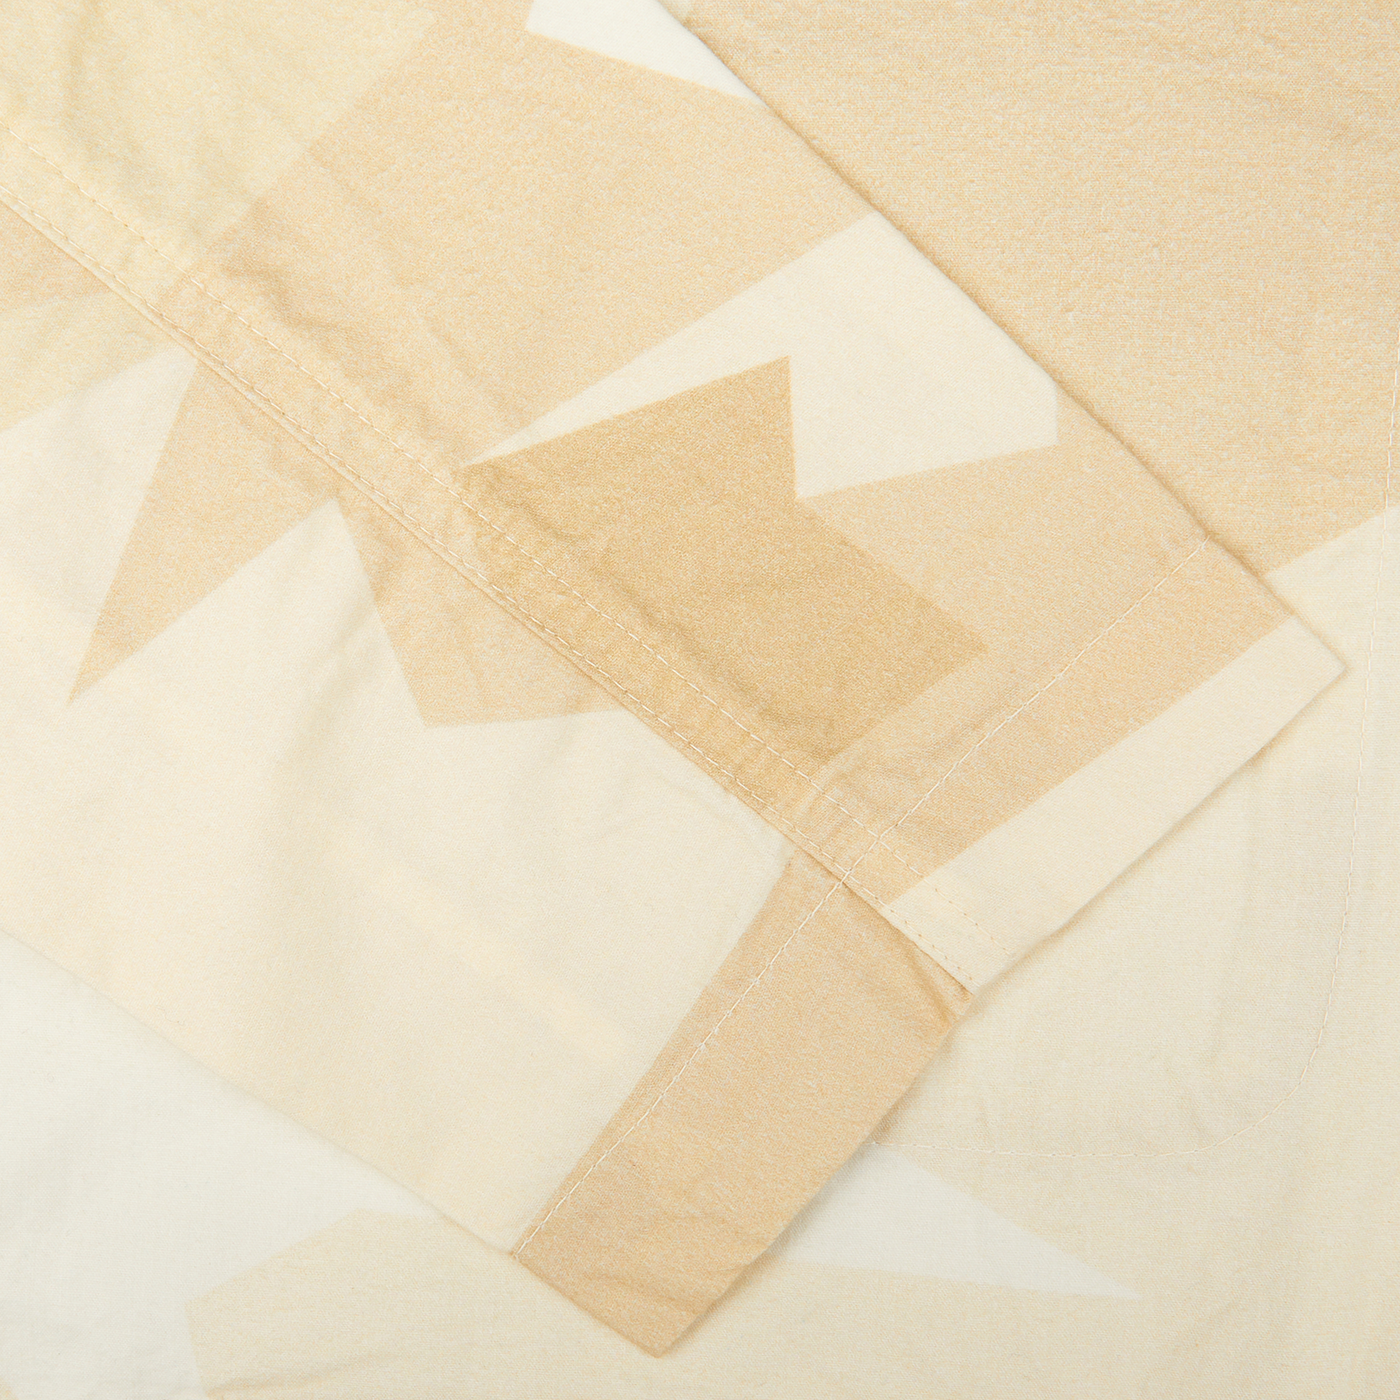 A close up of a sand beige camo cotton piece of fabric from Universal Works Bakers Jacket.